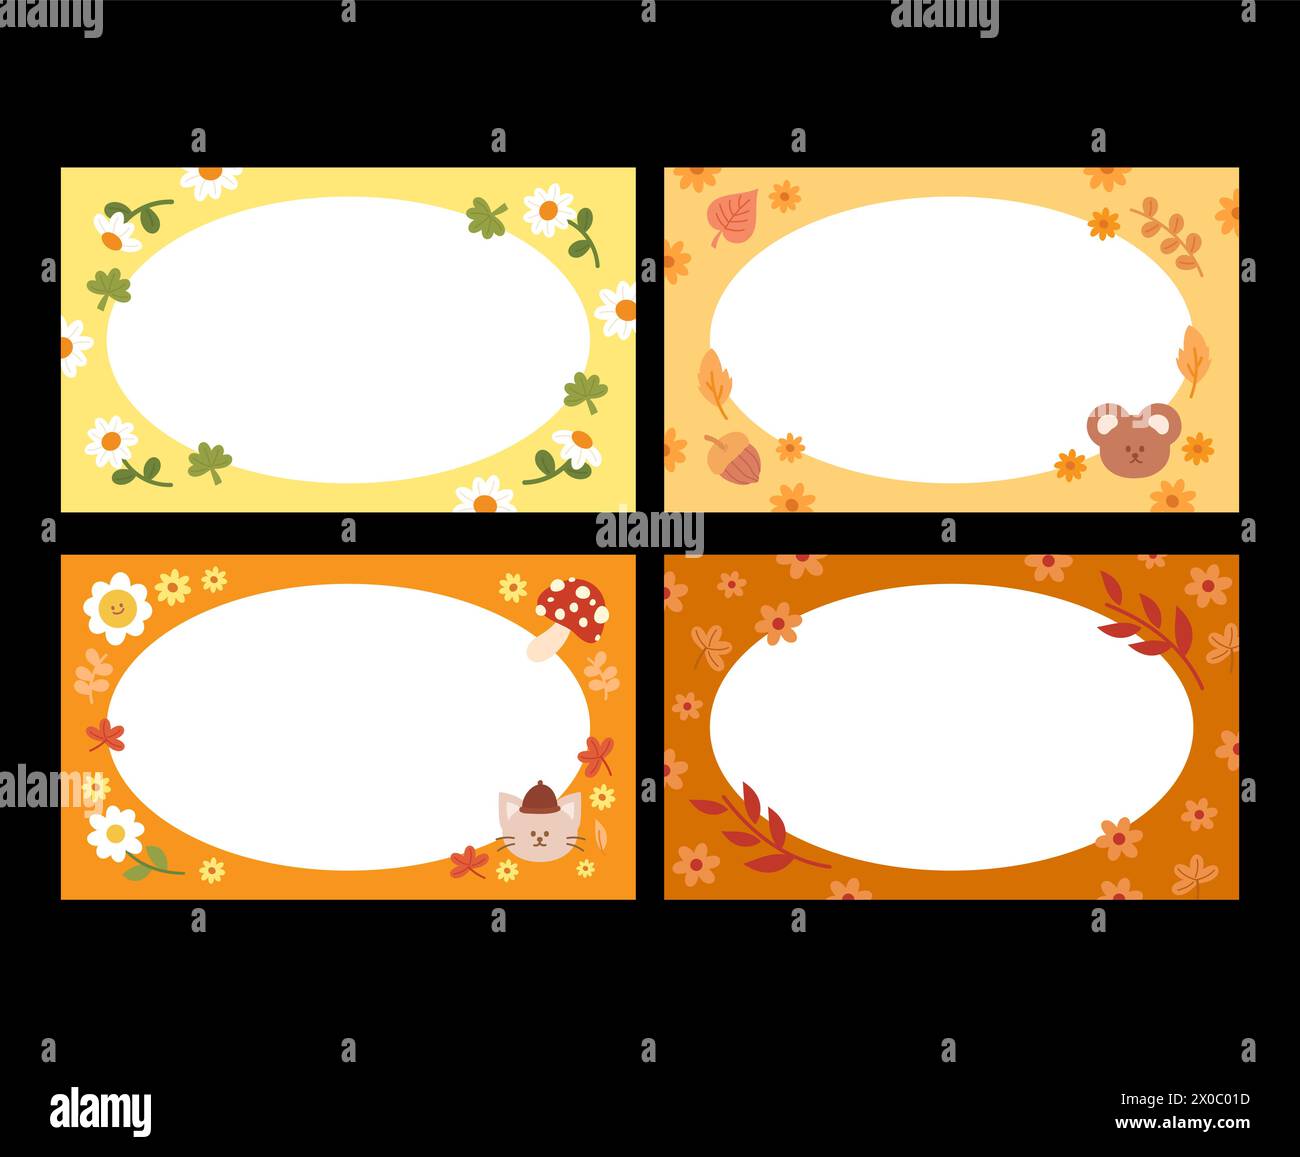 Autumn rectangle frames with autumn flowers, leaves, cat, teddy bear, mushroom for banner, ad template, business, name tags, marketing, background Stock Vector